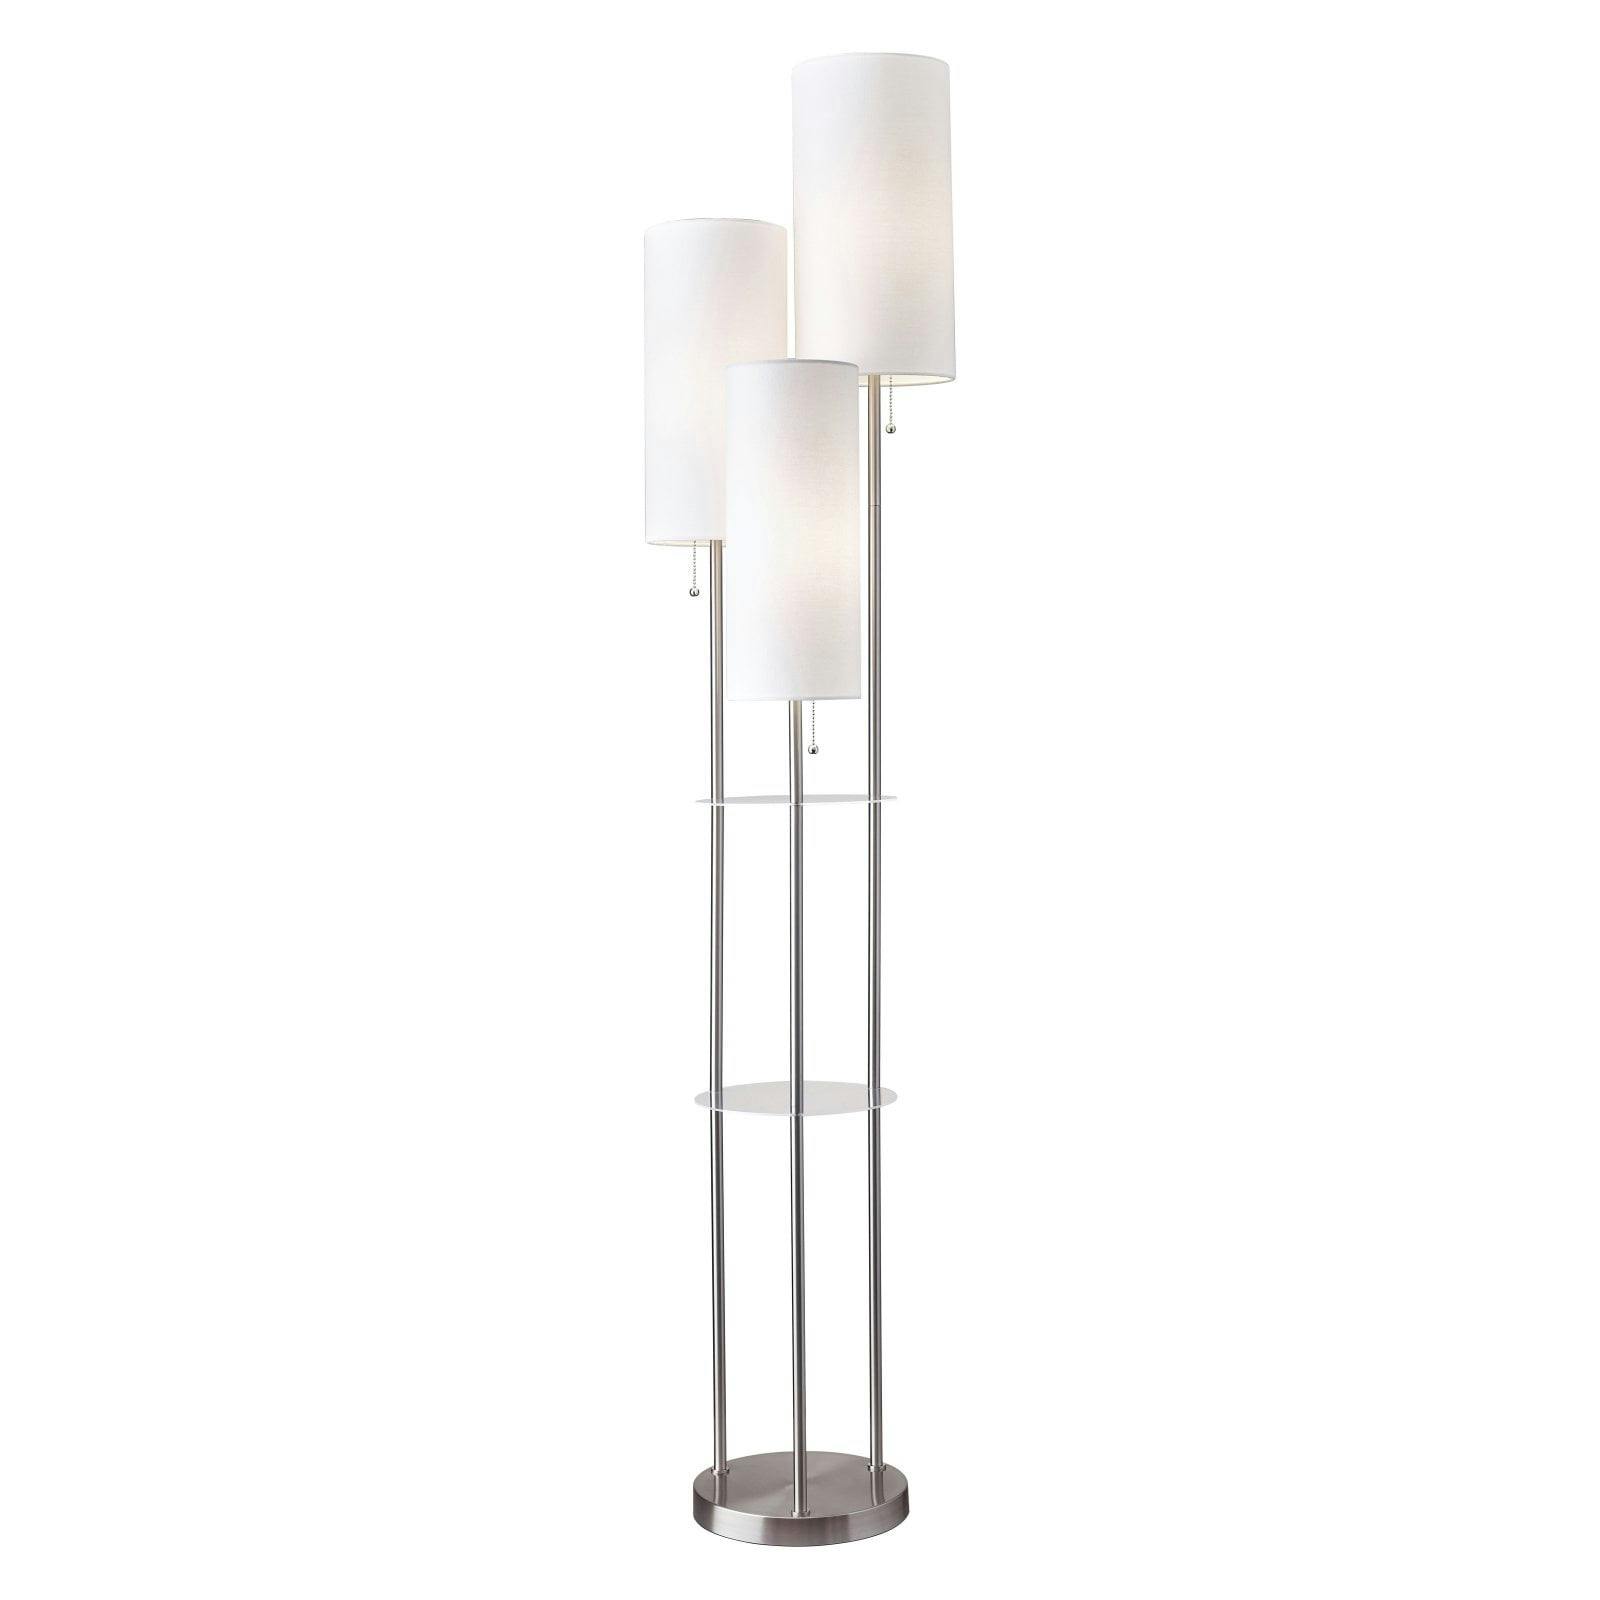 Brushed Steel Multi-Light Floor Lamp with Acrylic Shelves